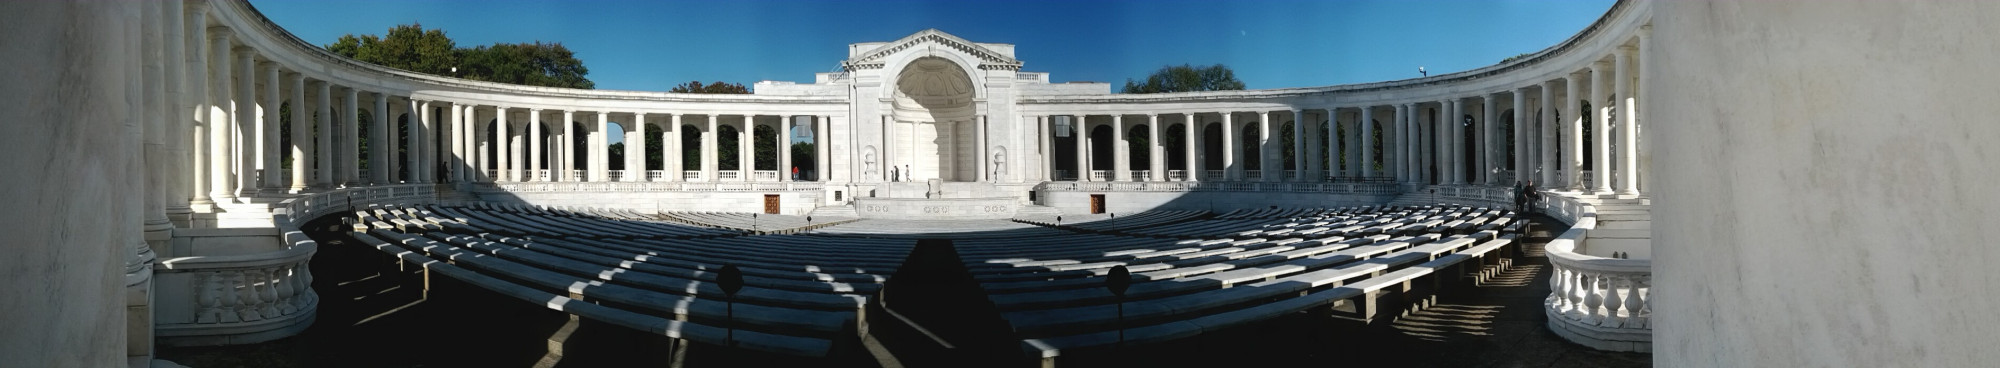 tomb of the unknown soldier amphitheater